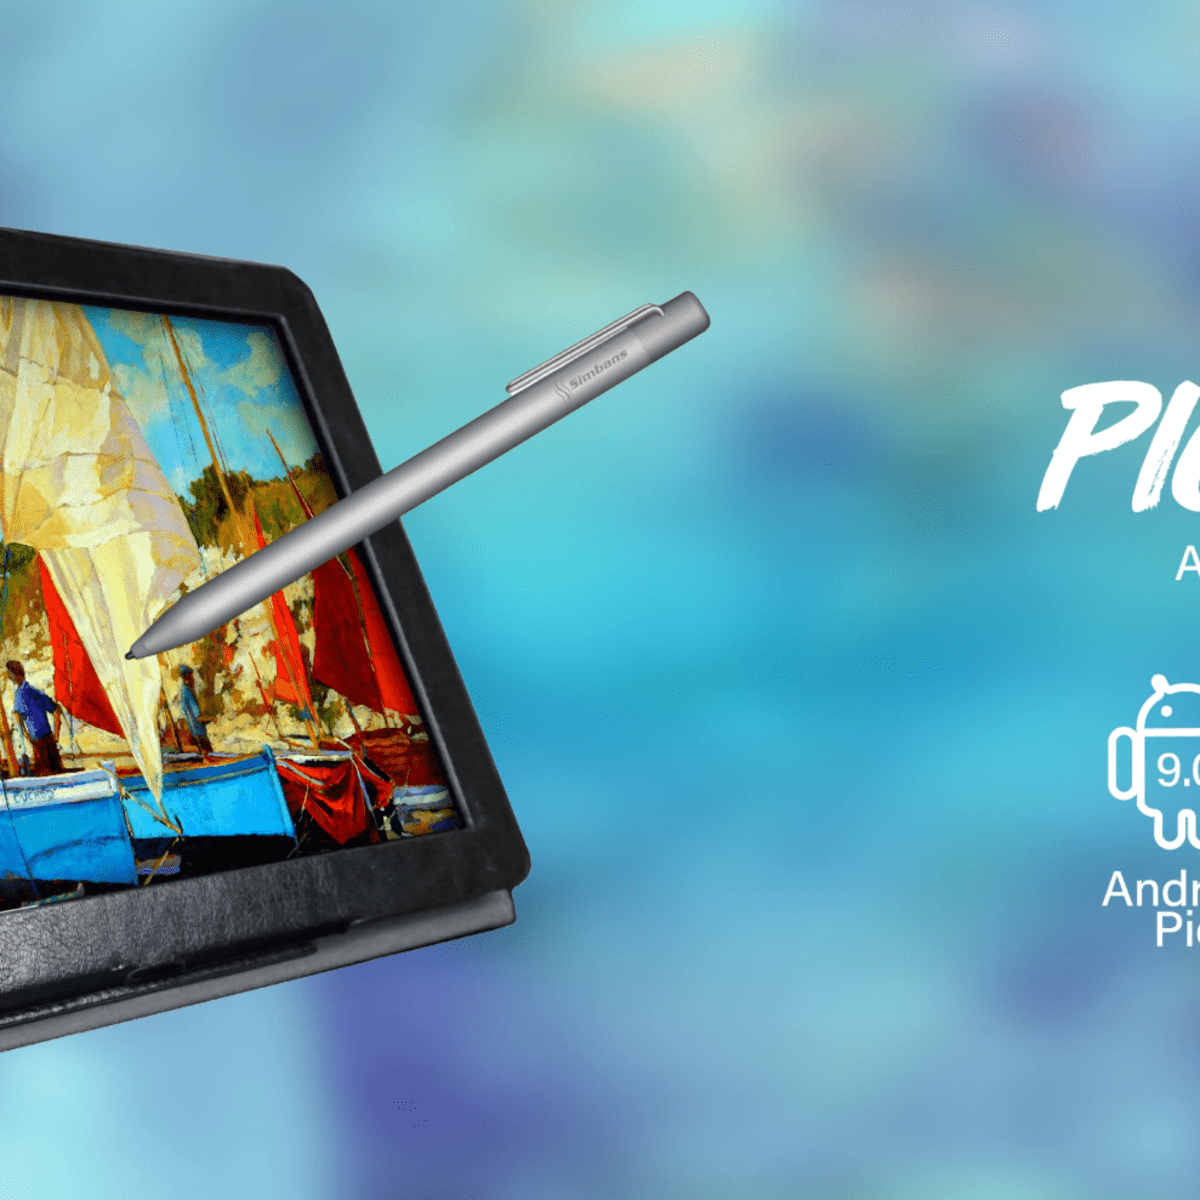 Simbans PicassoTab XL portable drawing tablet review - The Gadgeteer